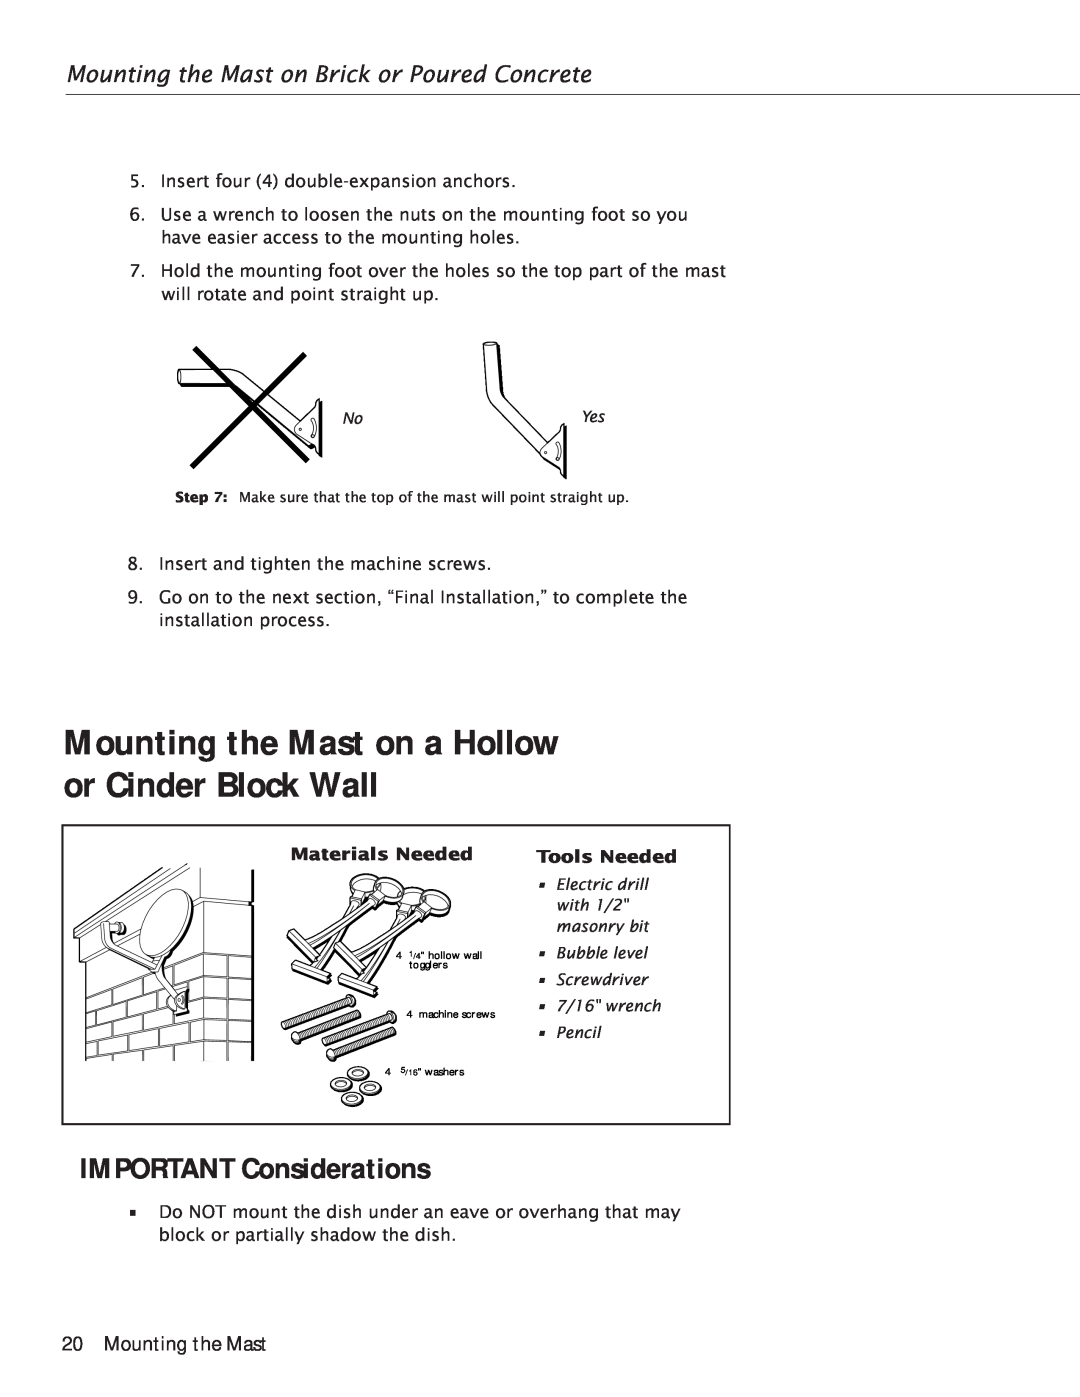 RCA Satellite TV Antenna manual Mounting the Mast on a Hollow or Cinder Block Wall, IMPORTANT Considerations 